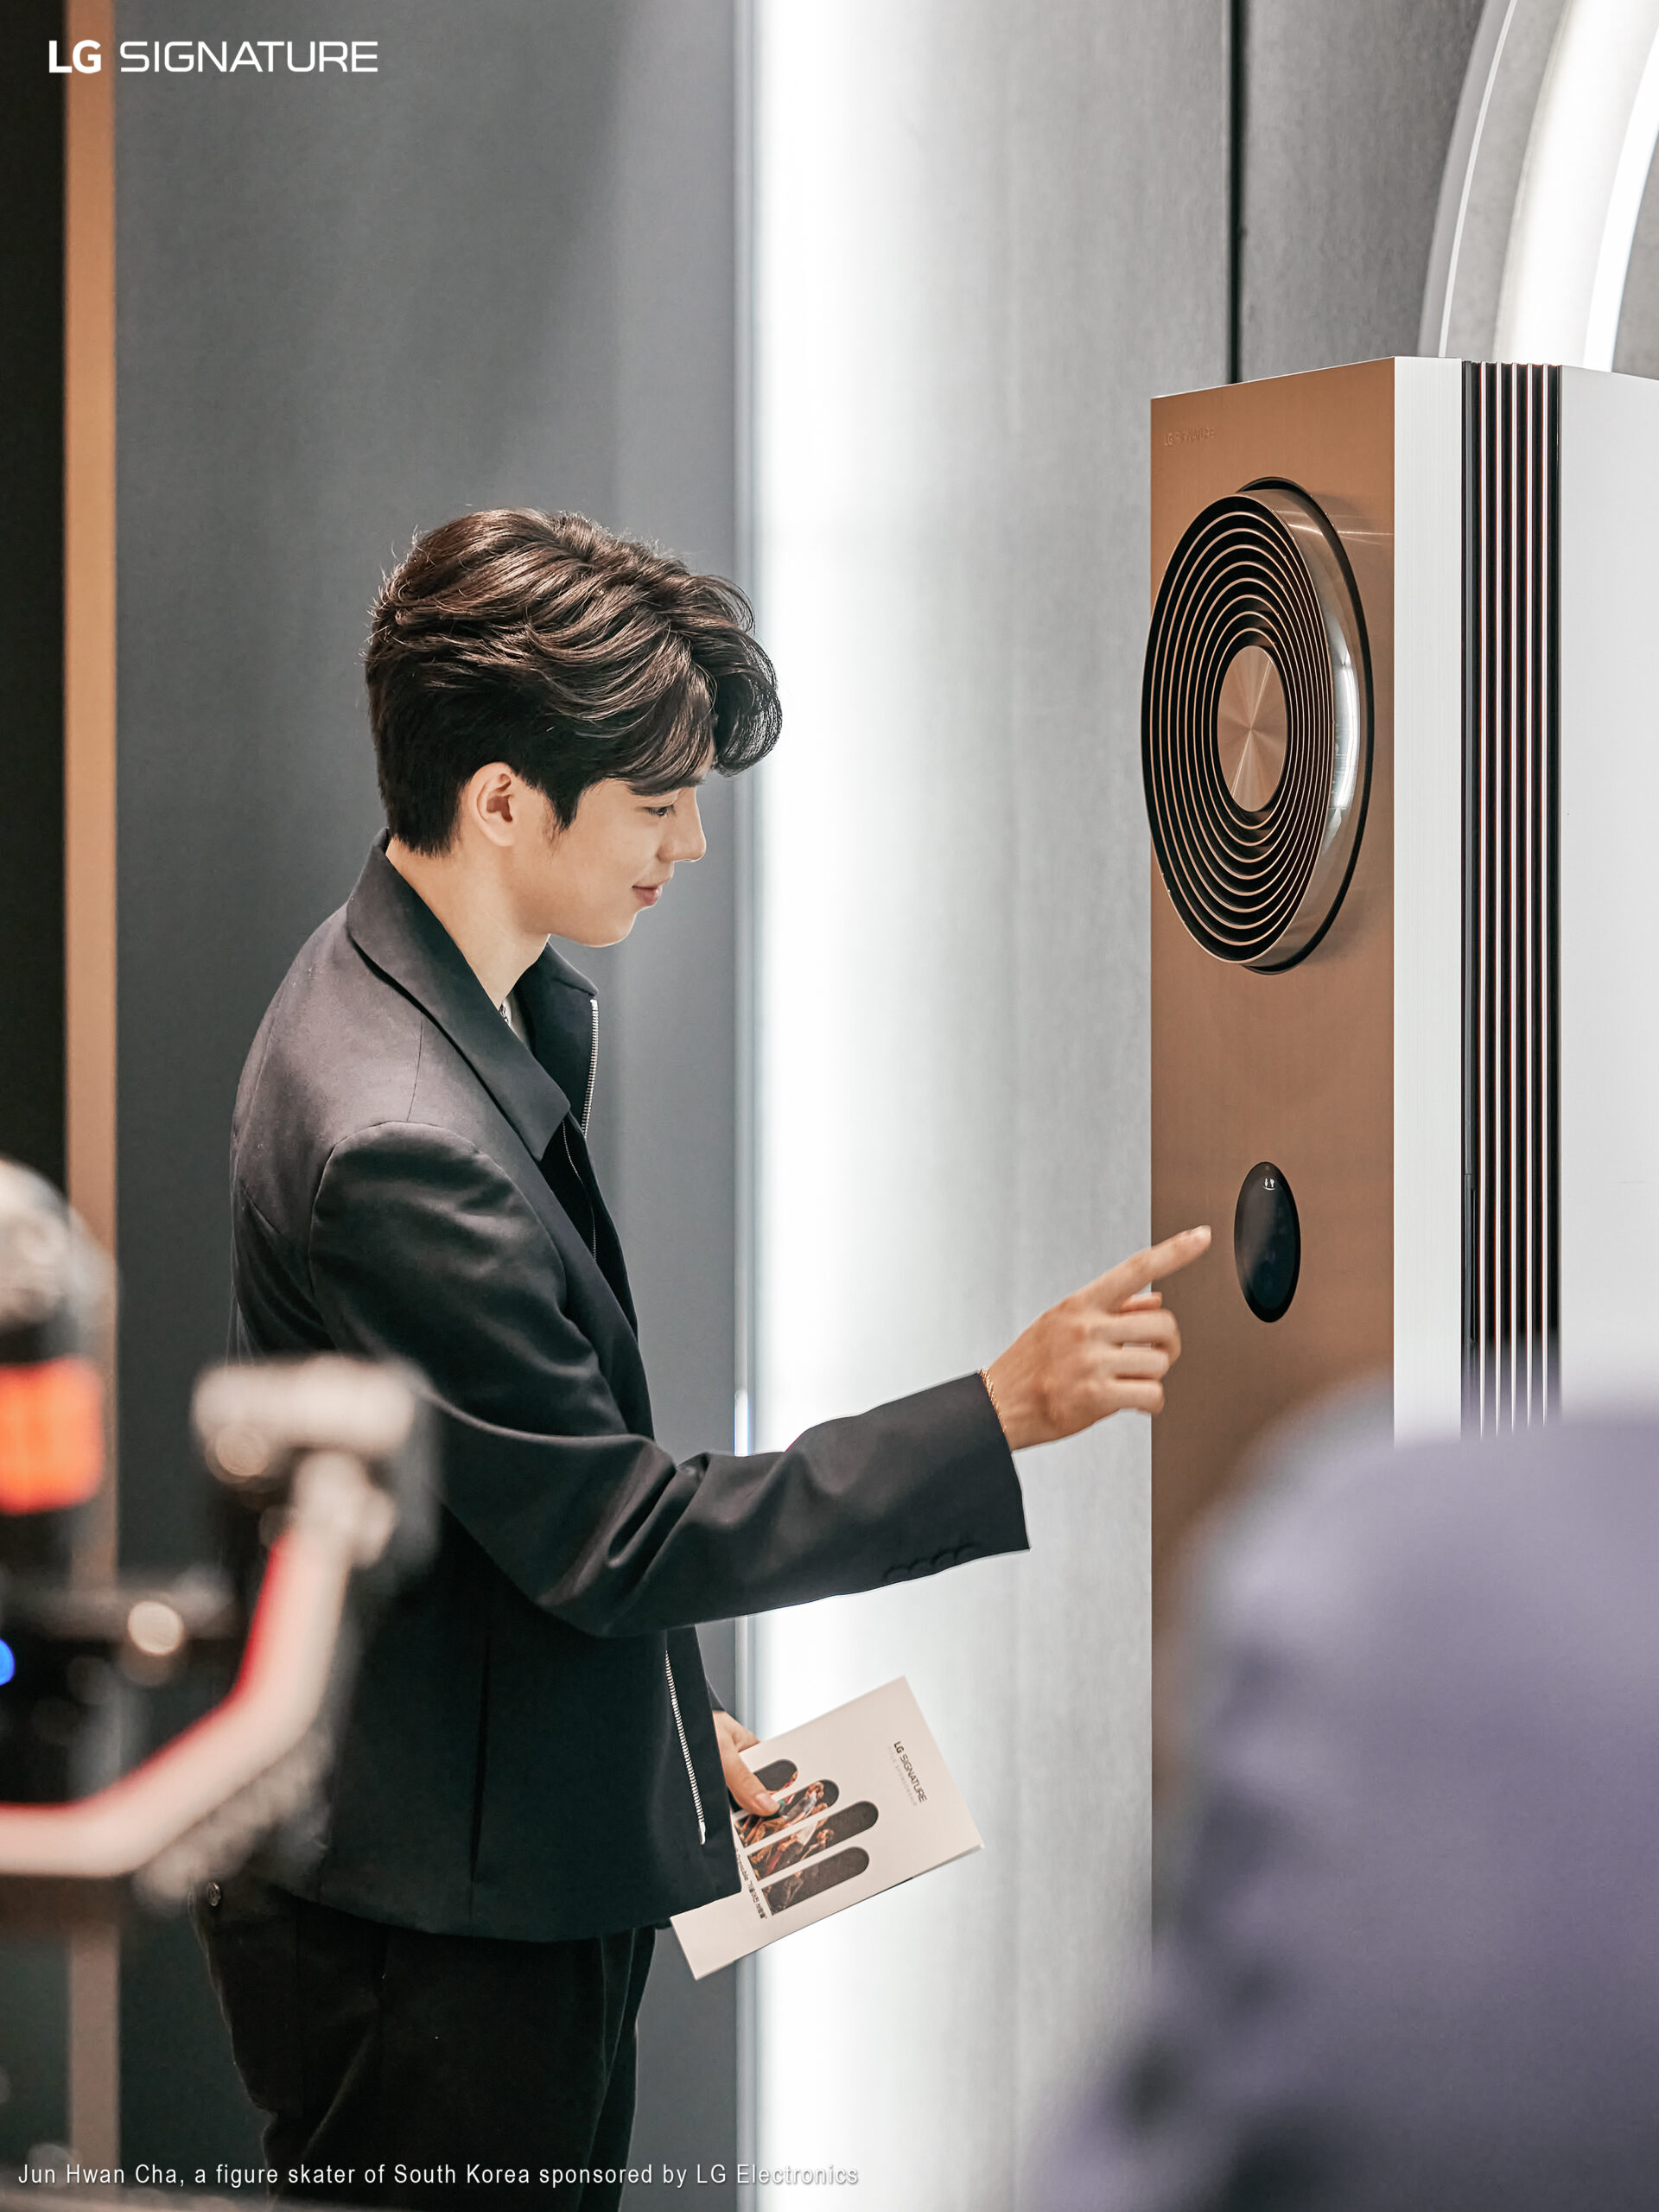 Professional ice skater Cha Jun-hwan trying out LG SIGNATURE Air Conditioner by touching the temperature control panel